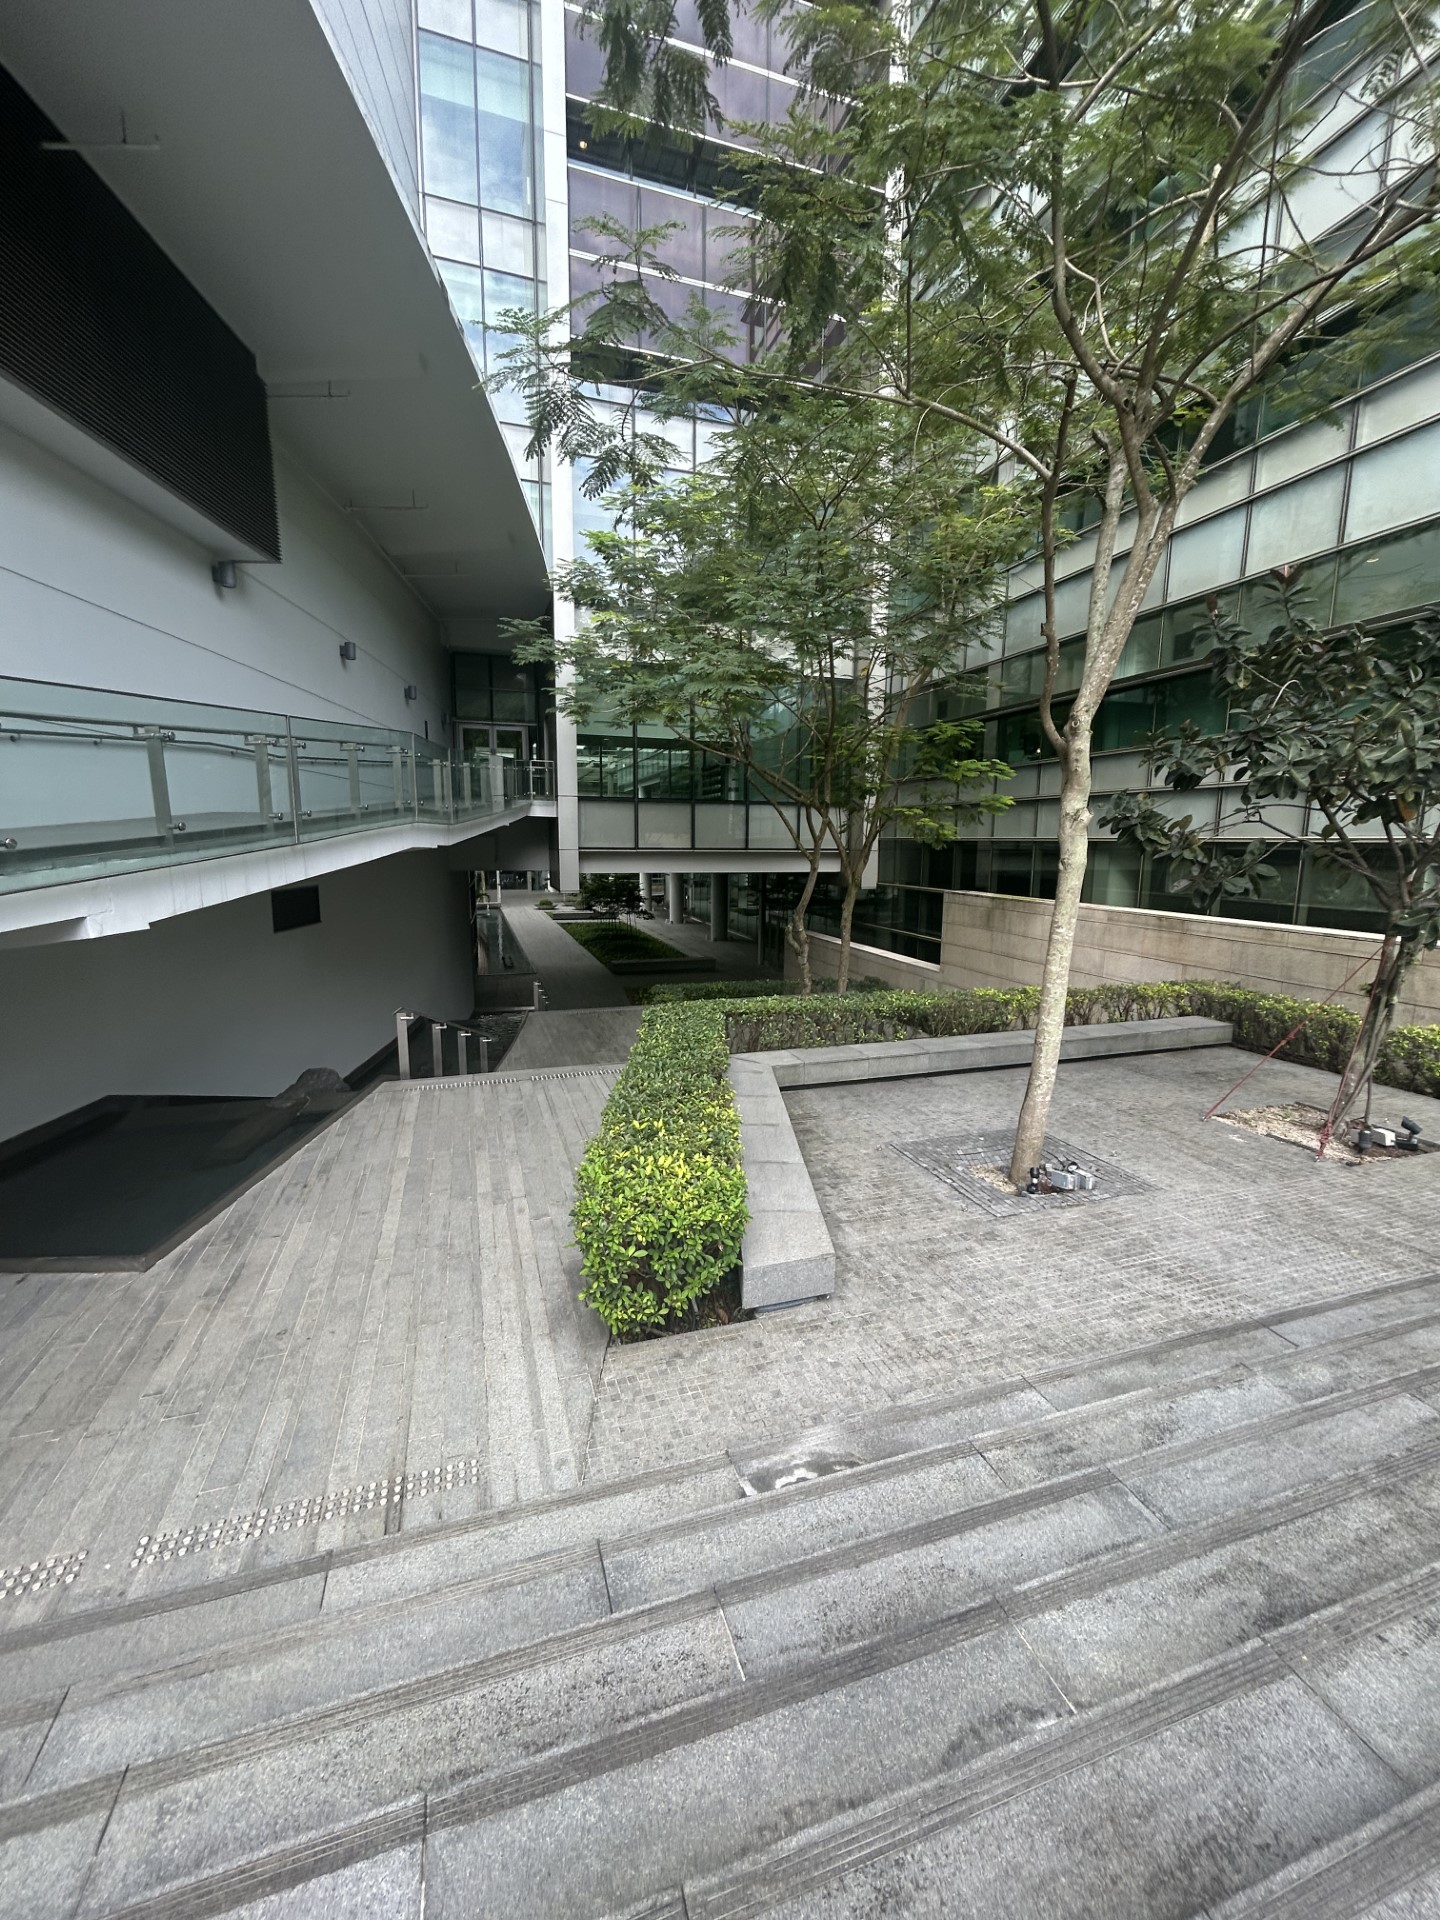 The inner courtyard in the modern office building with trees growing in the centre